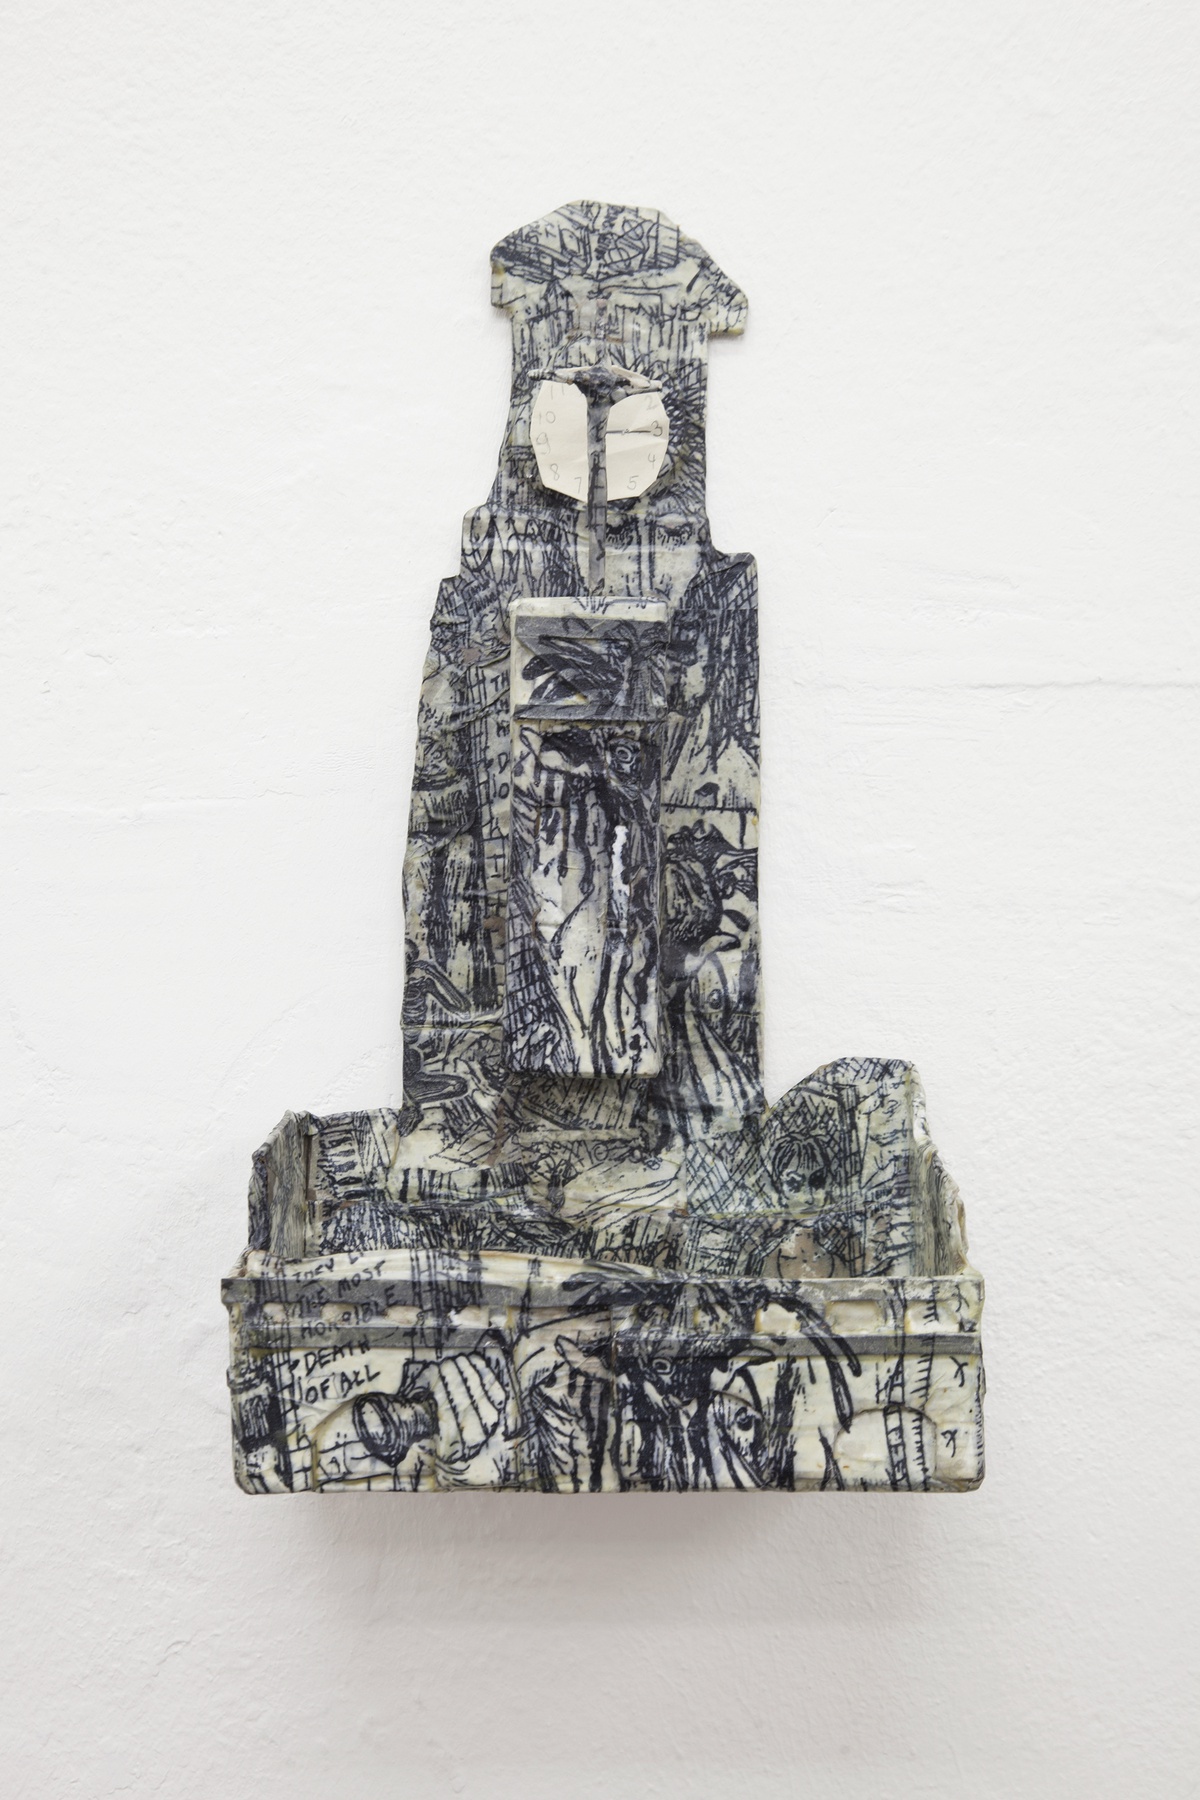 Lukas Quietzsch, Liebfrauenkirche, 2017encaustic and ink on cardboard and paper23 x 17 x 42 cm